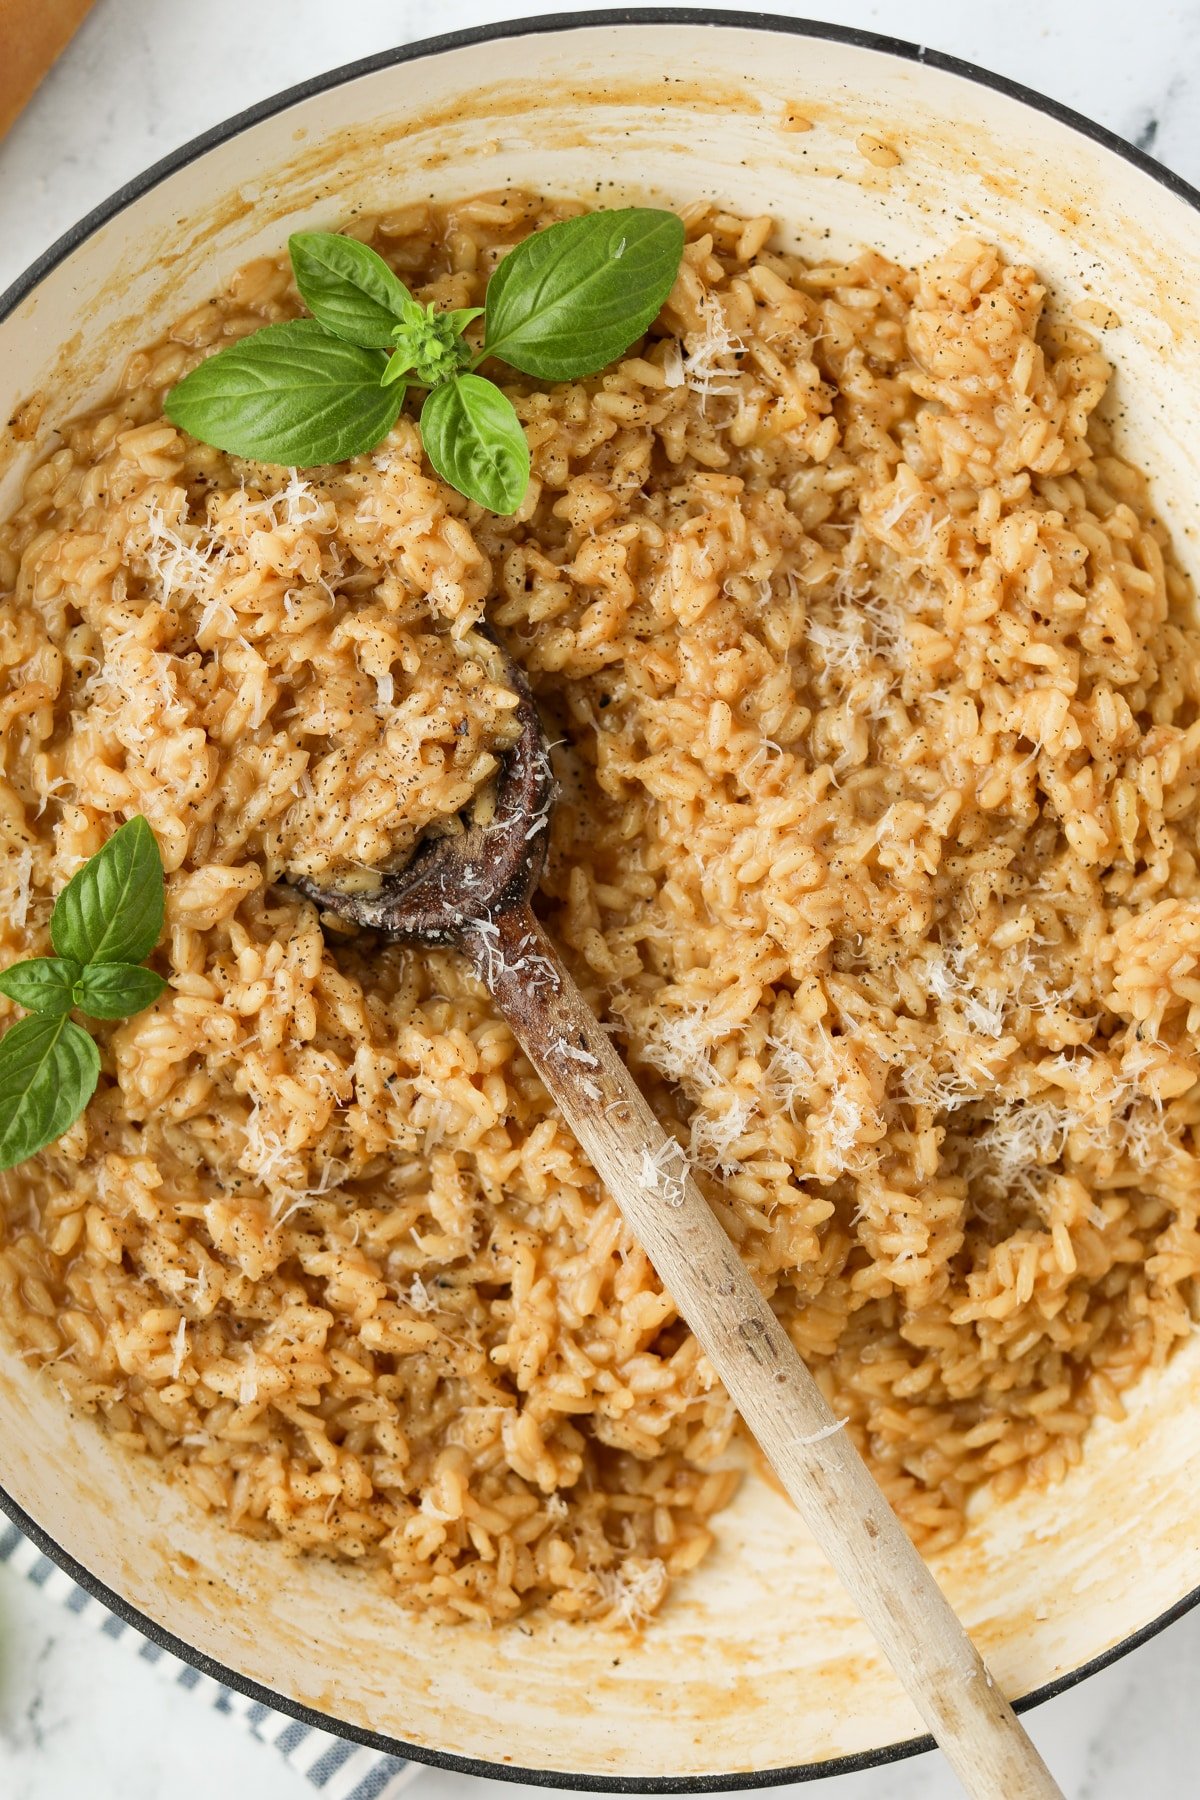 An enameled skillet filled with cooked rice and garnished with fresh basil.